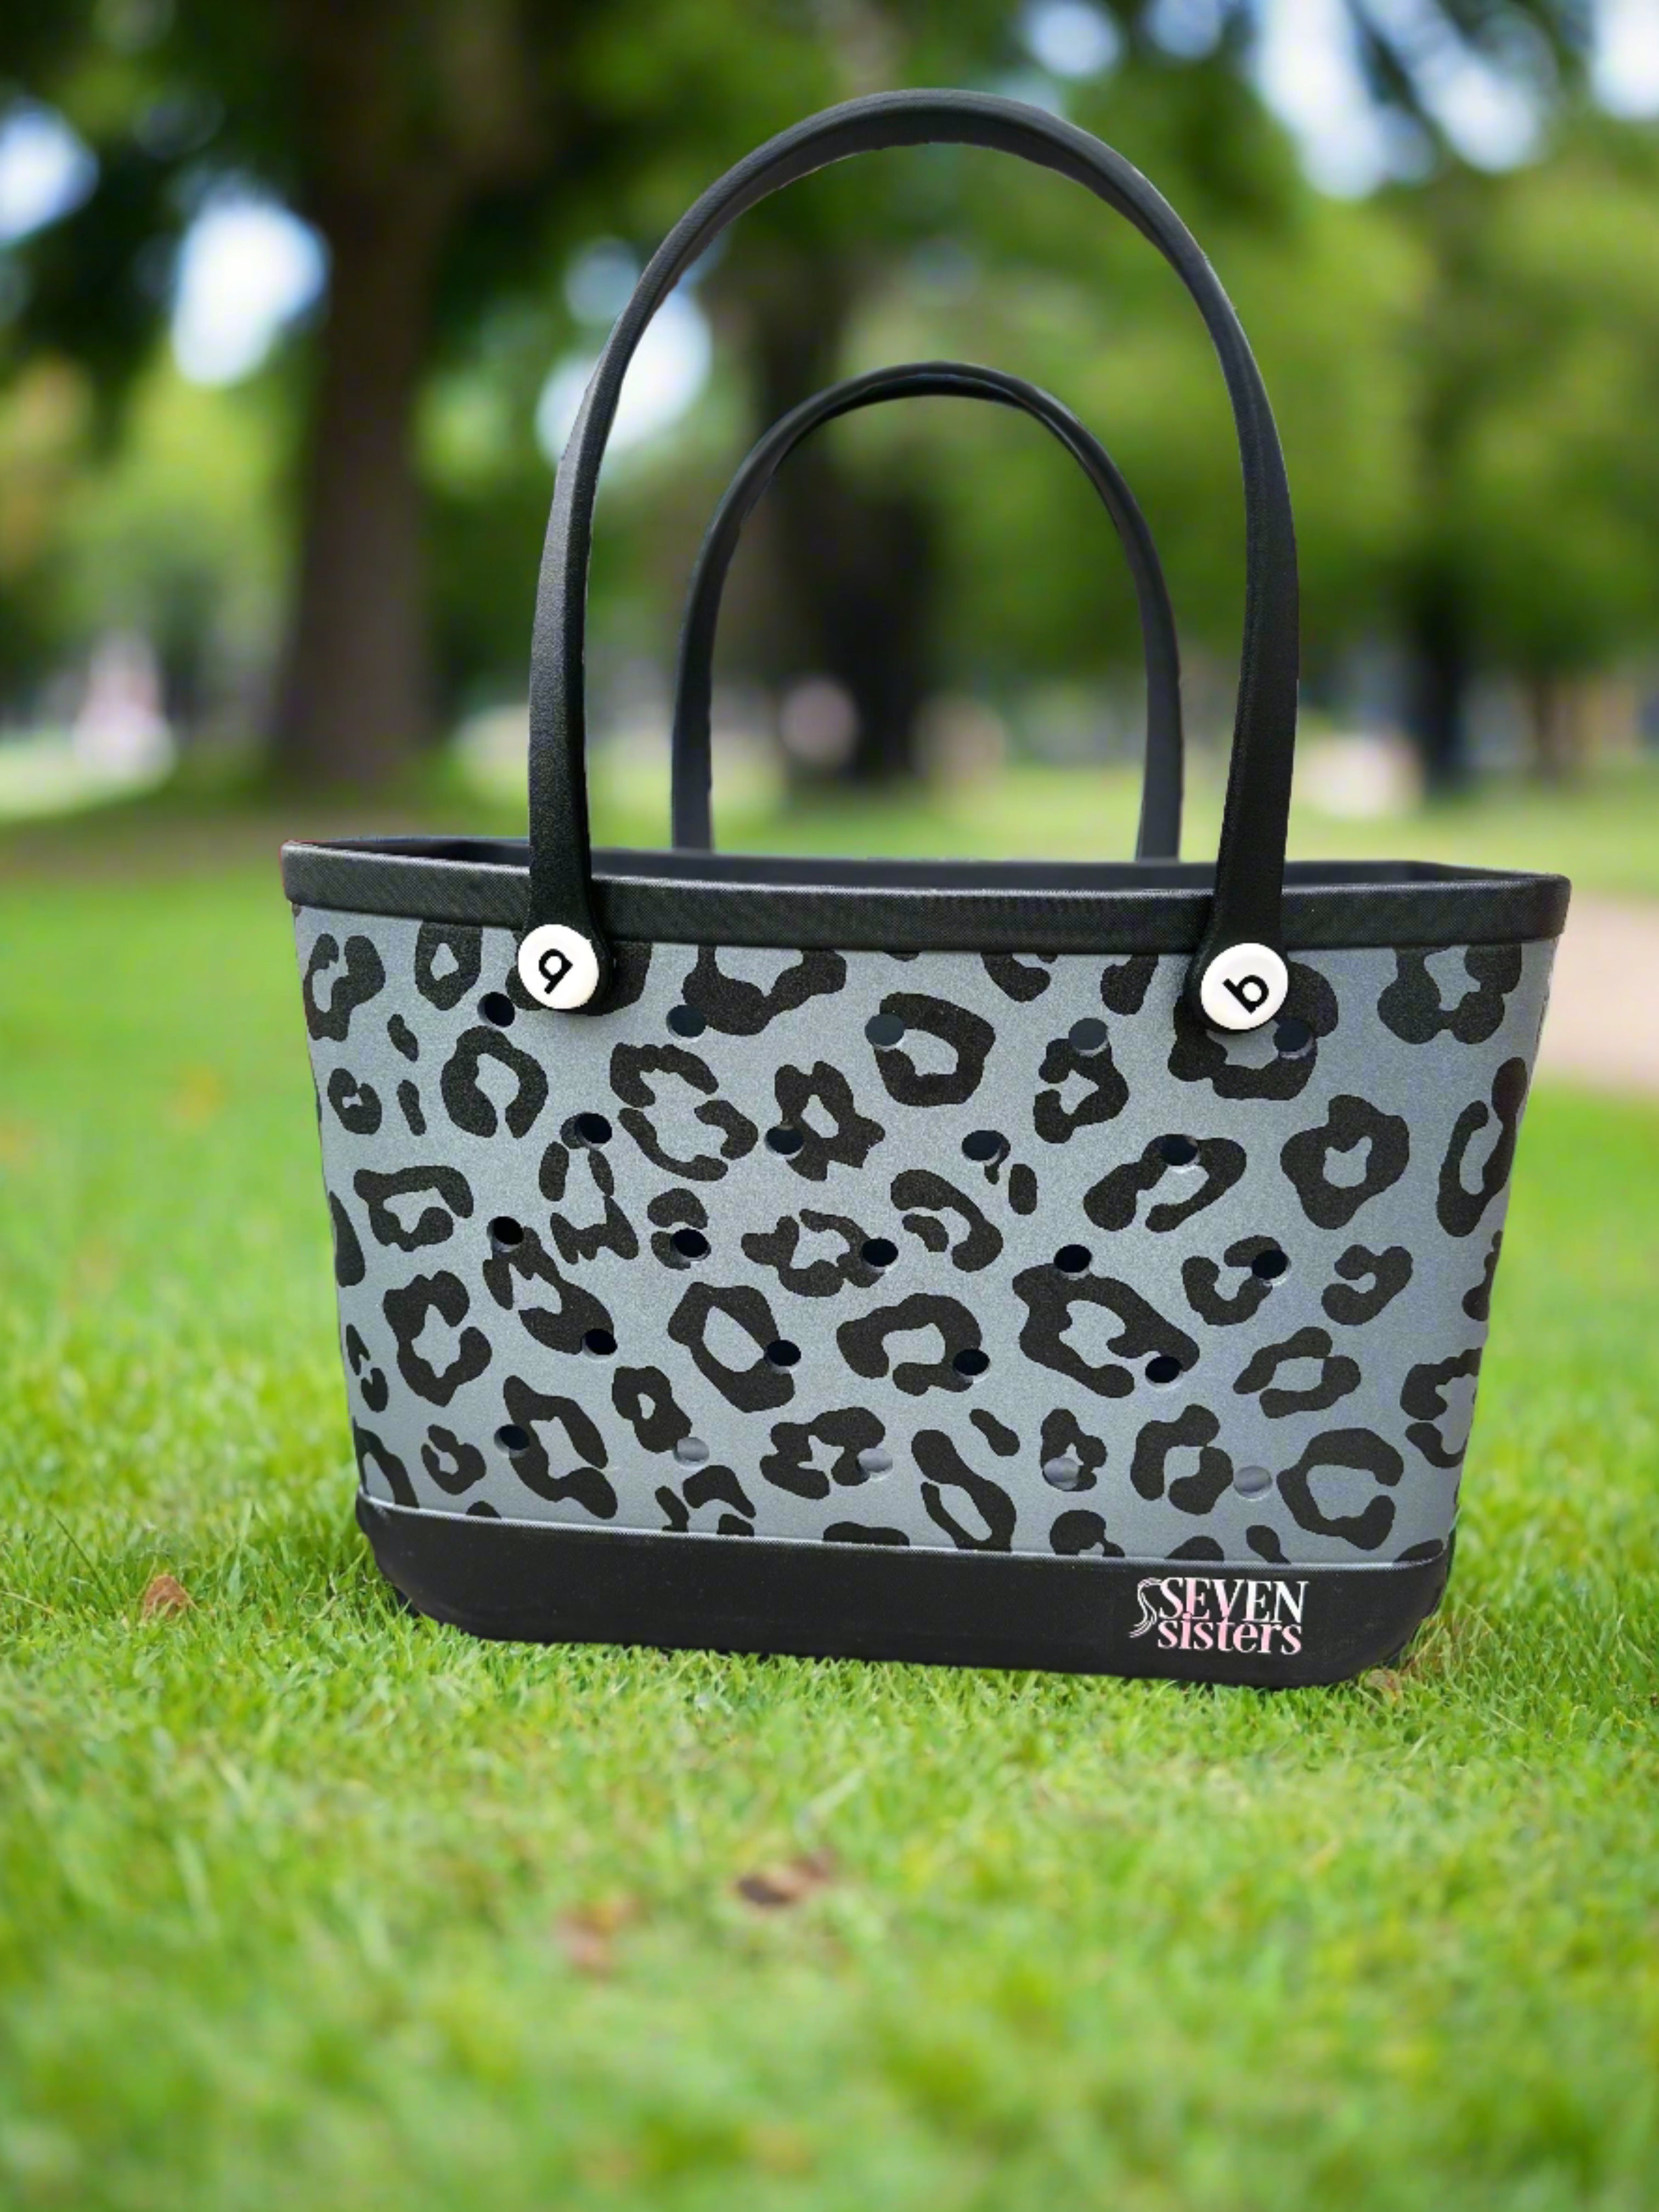 Seven Sisters - Stay stylish and organized with our Black Leopard Waterproof Silicone Tote. Perfect for the beach, pool, or any on-the-go activity. Durable and versatile, this tote is a must-have accessory for all your essentials. Order yours today!